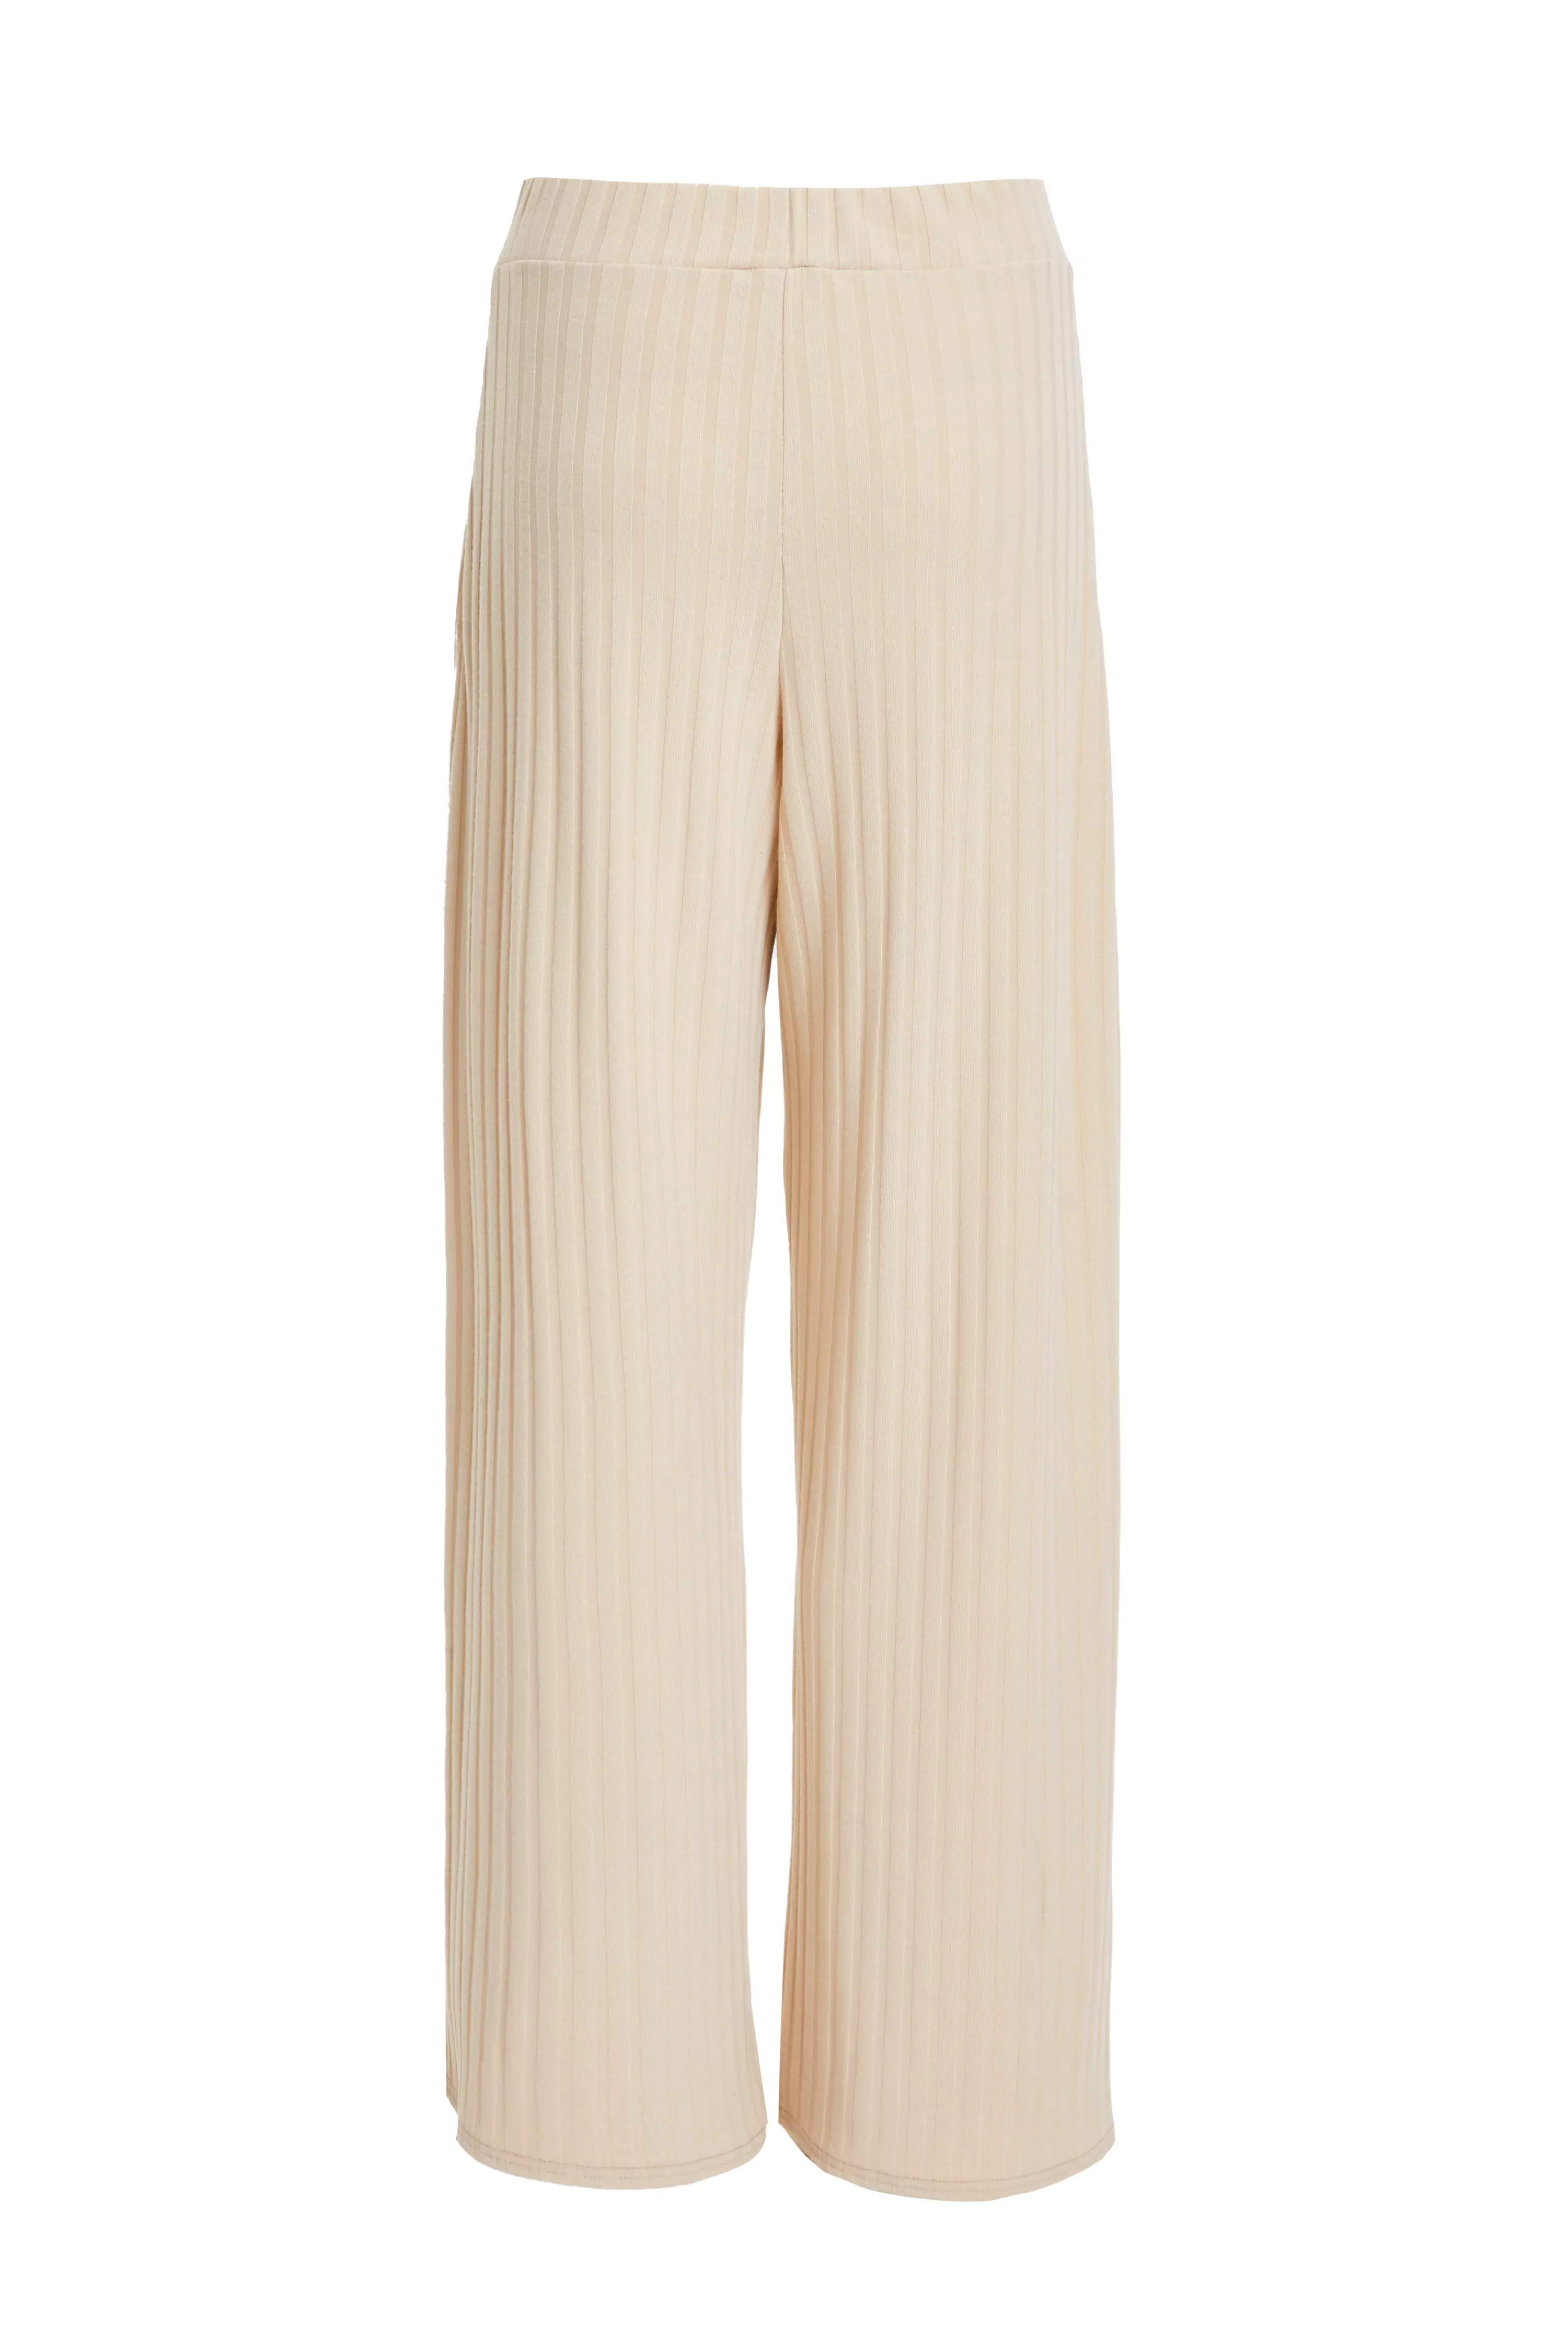 Stone Ribbed High Waisted Trousers